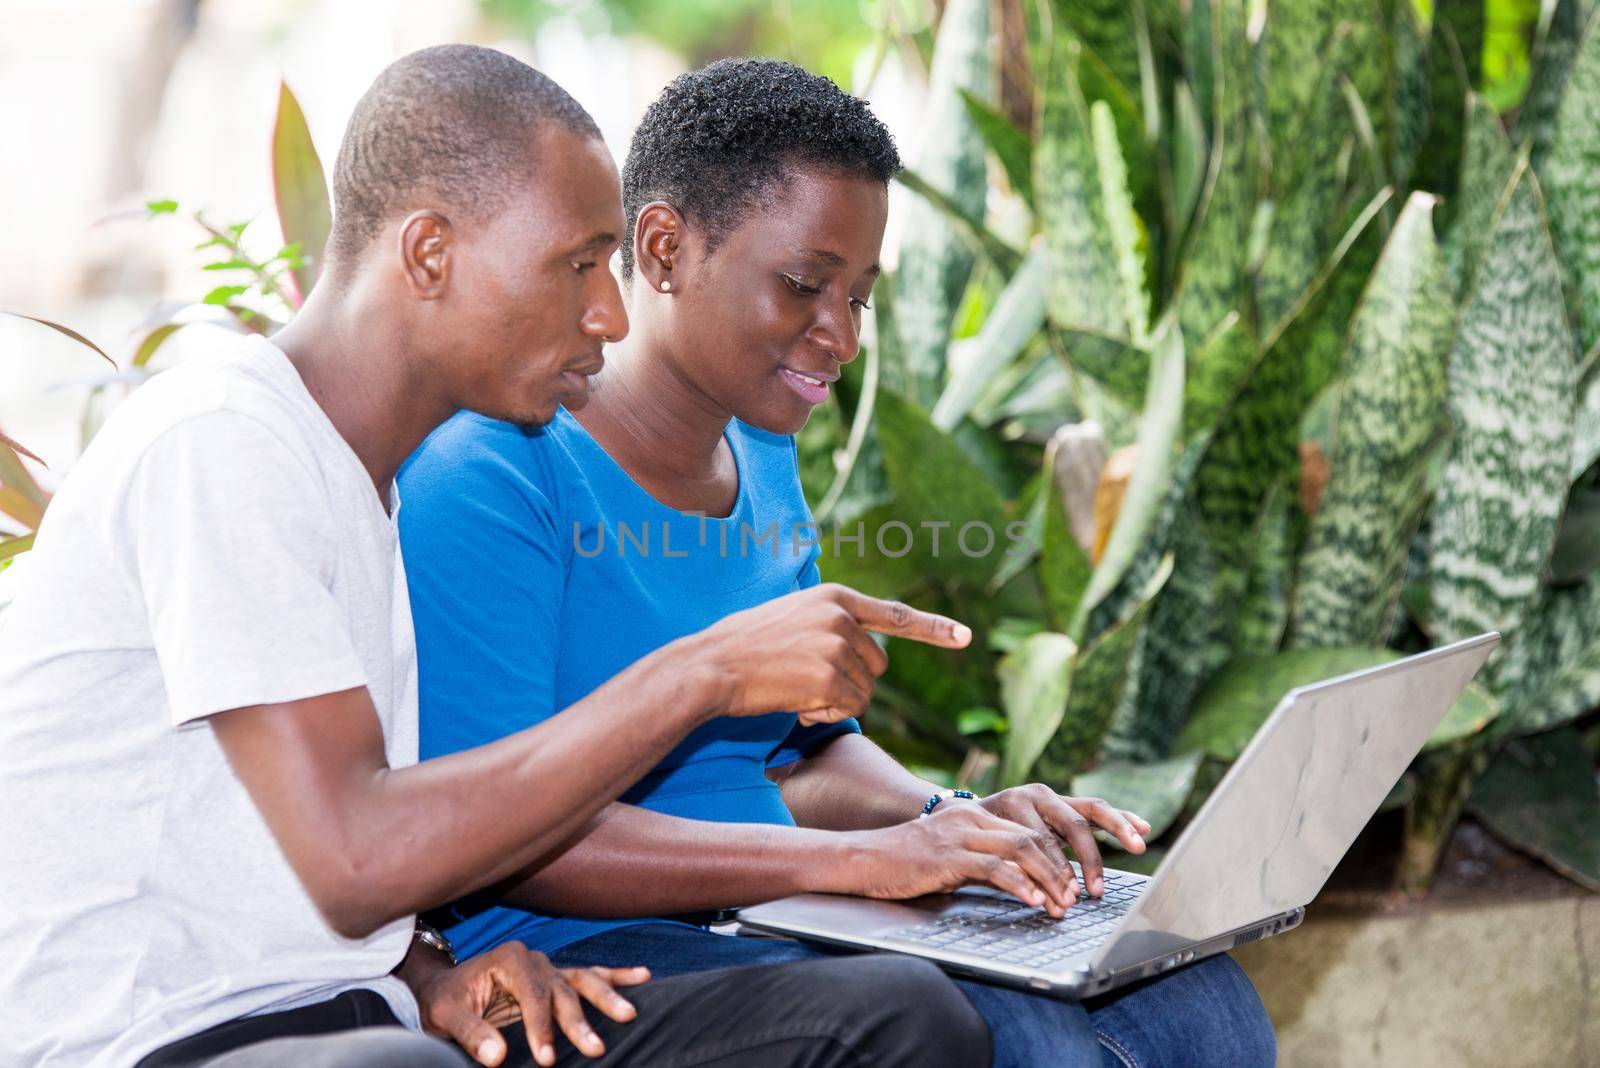 young students sitting in park with laptop doing research while smiling.